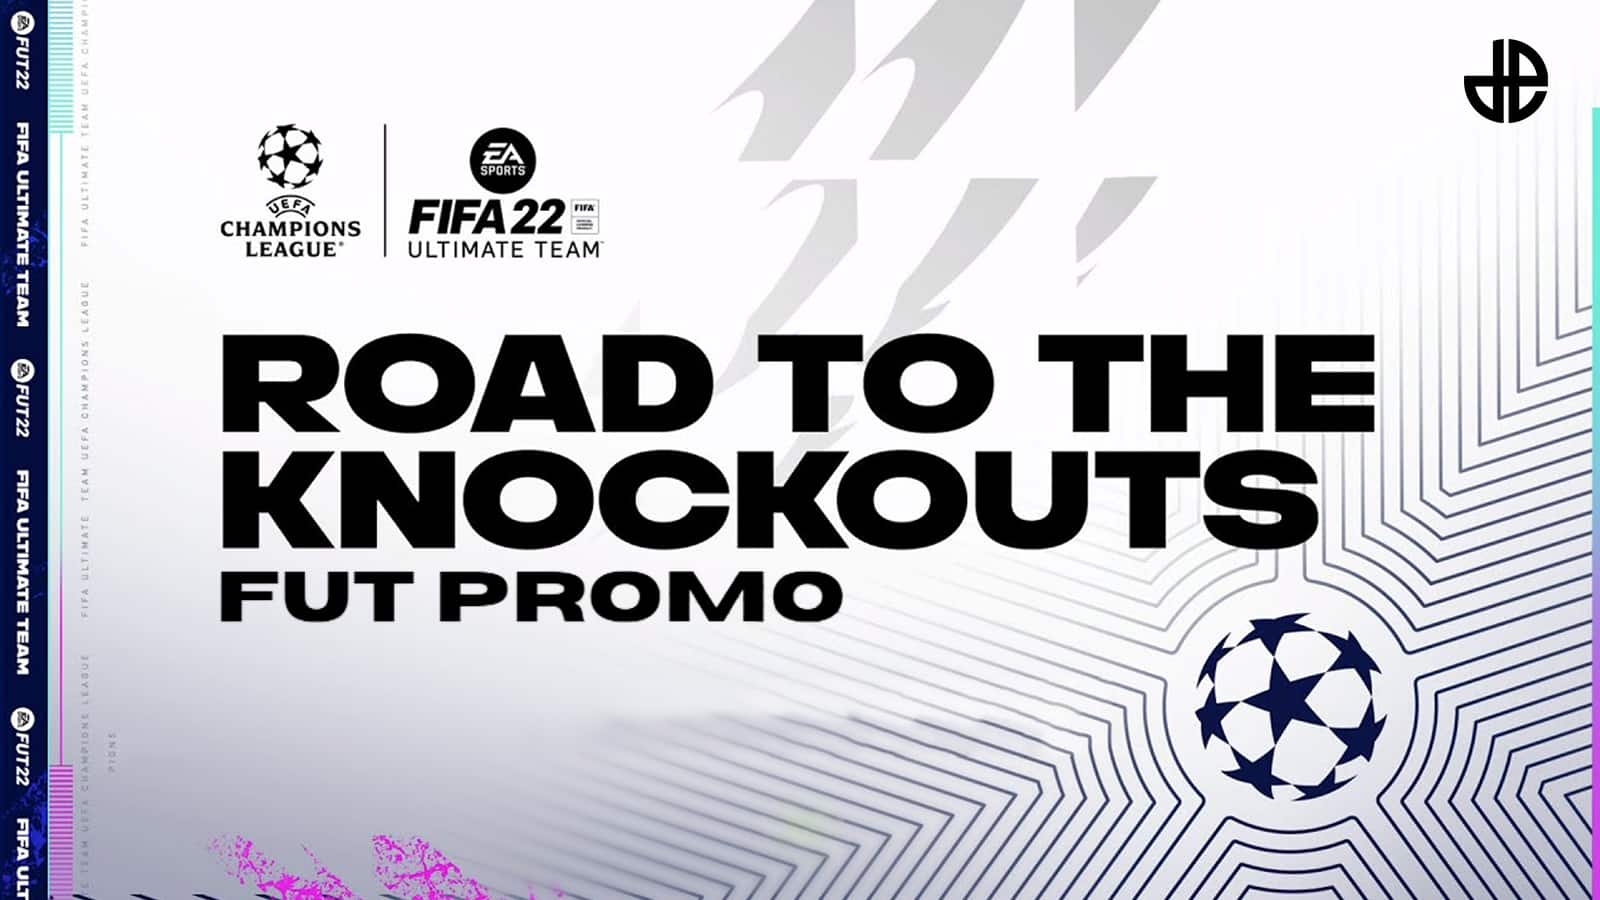 Road to the Knockouts promo FUT loading screen in FIFA 22 Ultimate Team.